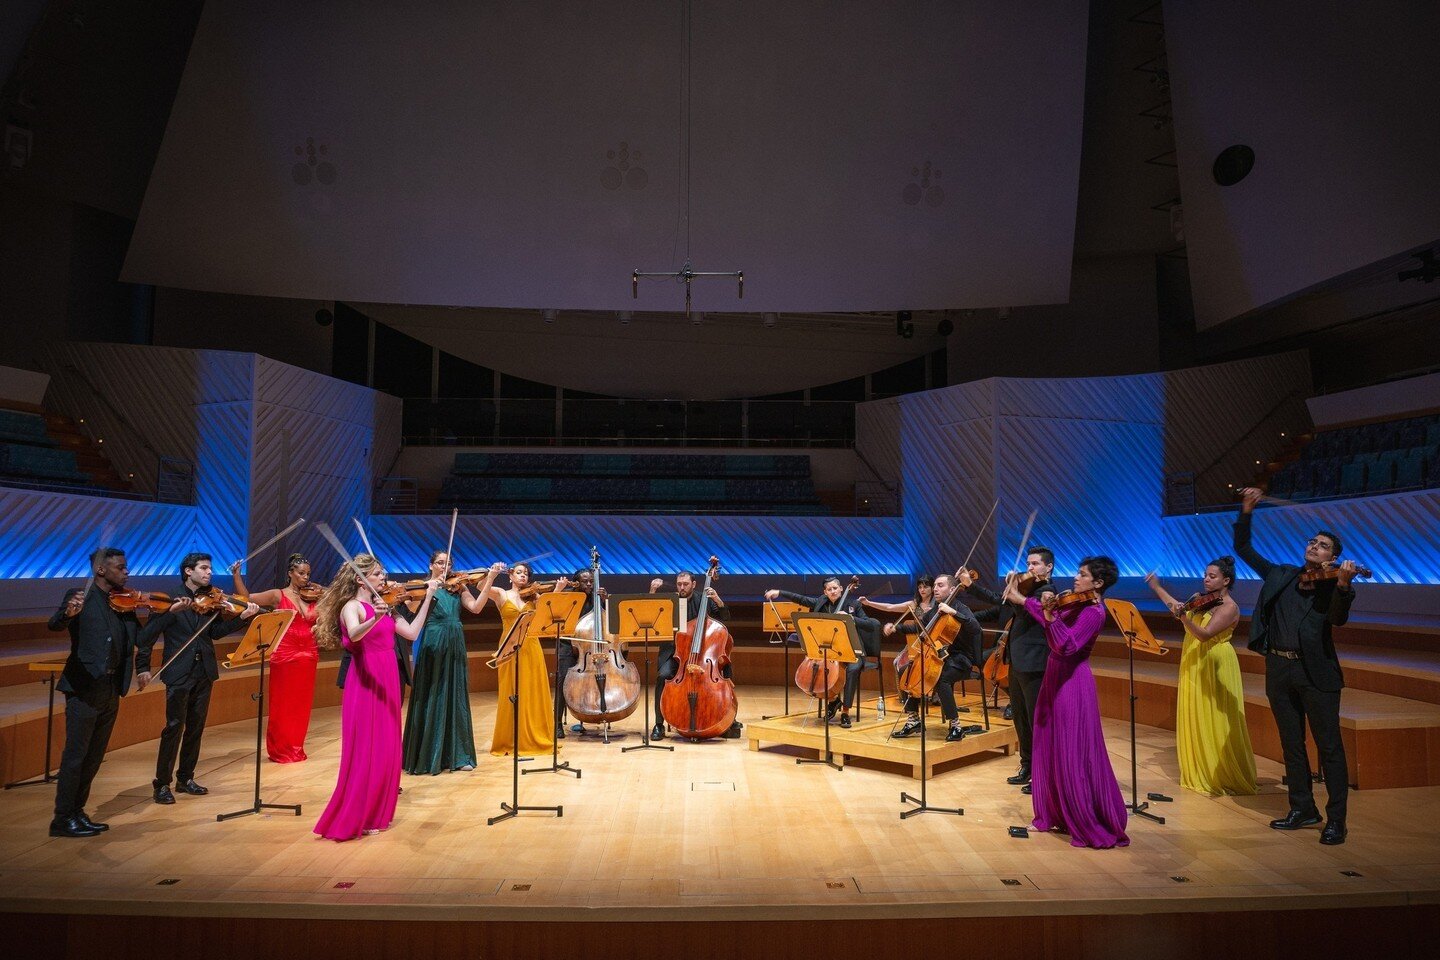 The Sphinx Virtuosi shares the stage with the Minnesota Orchestra in a program Feb 1-3 featuring Michael Abels&rsquo; Global Warming, Astor Piazzolla&rsquo;s Winter and Summer, Carlos Simon&rsquo;s meditative Breathe, and Ang&eacute;lica Negr&oacute;